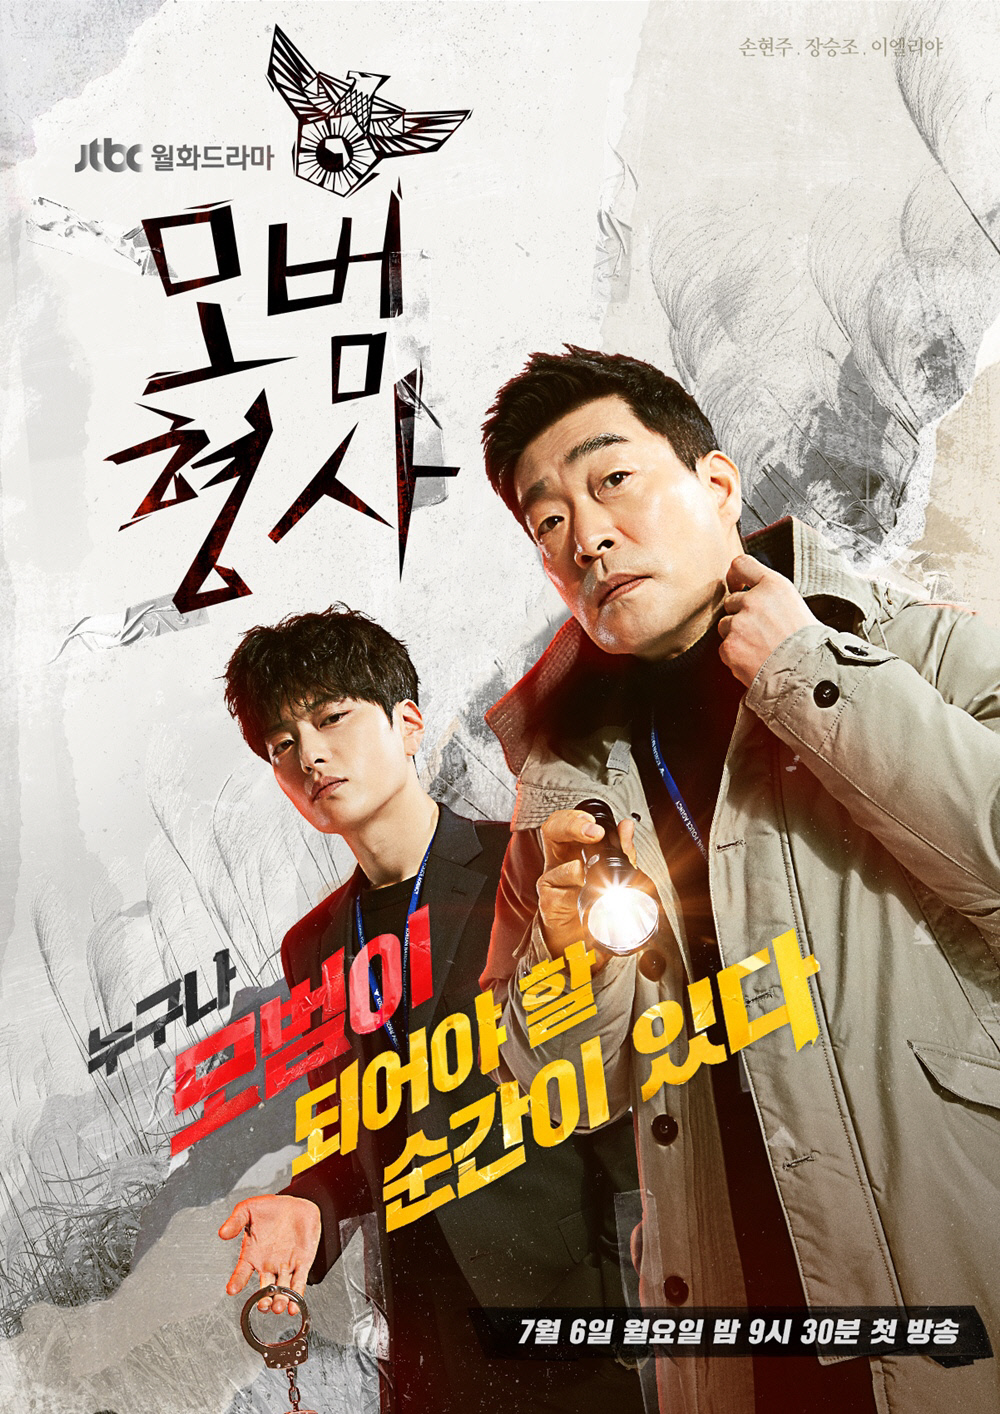 Drama Main Poster with Son Hyun-joo and Jang Seung-jo was unveiled on Sunday.The new JTBC drama The Good Detective, which will be broadcast at 9:30 pm on the 6th of next month, is a rhetoric that tracks a truth that is covered up by two different Detectives.The main poster, which was released, informs the veteran veteran Detective robbery window (Son Hyun-jooo) and luxury elite Detective Oh Ji-hyuk (Jang Seung-jo) that Everyone has a moment to be The Good Detective.But the atmosphere of the two Detectives seems far from The Good Detective.They are the same two people who are 180 degrees different from styling to characters, who have a similar style of robbery and black suits.Its not The Good Detective.Kang Do-chang is trying to avoid complicated cases with the promotion screening just around the corner, and although his work rating may have been the first, Oh Ji-hyeok, who has a falling humanity, thinks that he should solve the case and catch the criminal.The concealed truth of the incident five years ago begins to be revealed before those two.In front of Oh Ji-hyeok, who is carefully and carefully promoting his life to be promoted, he puts aside the robbery and humanity that he has been living in Detective life, and deals with the case as a Detective.So they are at the crossroads of choice, and the public main poster suggests the direction the two should move on.Everyone has a moment to be The Good Detective, he said.I wonder what the whole story of the case is, and what truth will be waiting for the end of the way for the two Detectives to go to The Good Detective.The main poster, which was released, contains the meaning of the reversal of the title and the chemistry of the two characters, the production team explained.The two Detectives, who were The Good Detective, hint at the direction of moving toward The Good Detective, and predict a partnership of inseparable hallucinations through two characters that are different, he said.Son Hyun-joo and Jang Seung-jo will show the best breathing through the image in the drama.Please check the story of the two Detectives that will run The Good Detective to track the truth on the first broadcast.